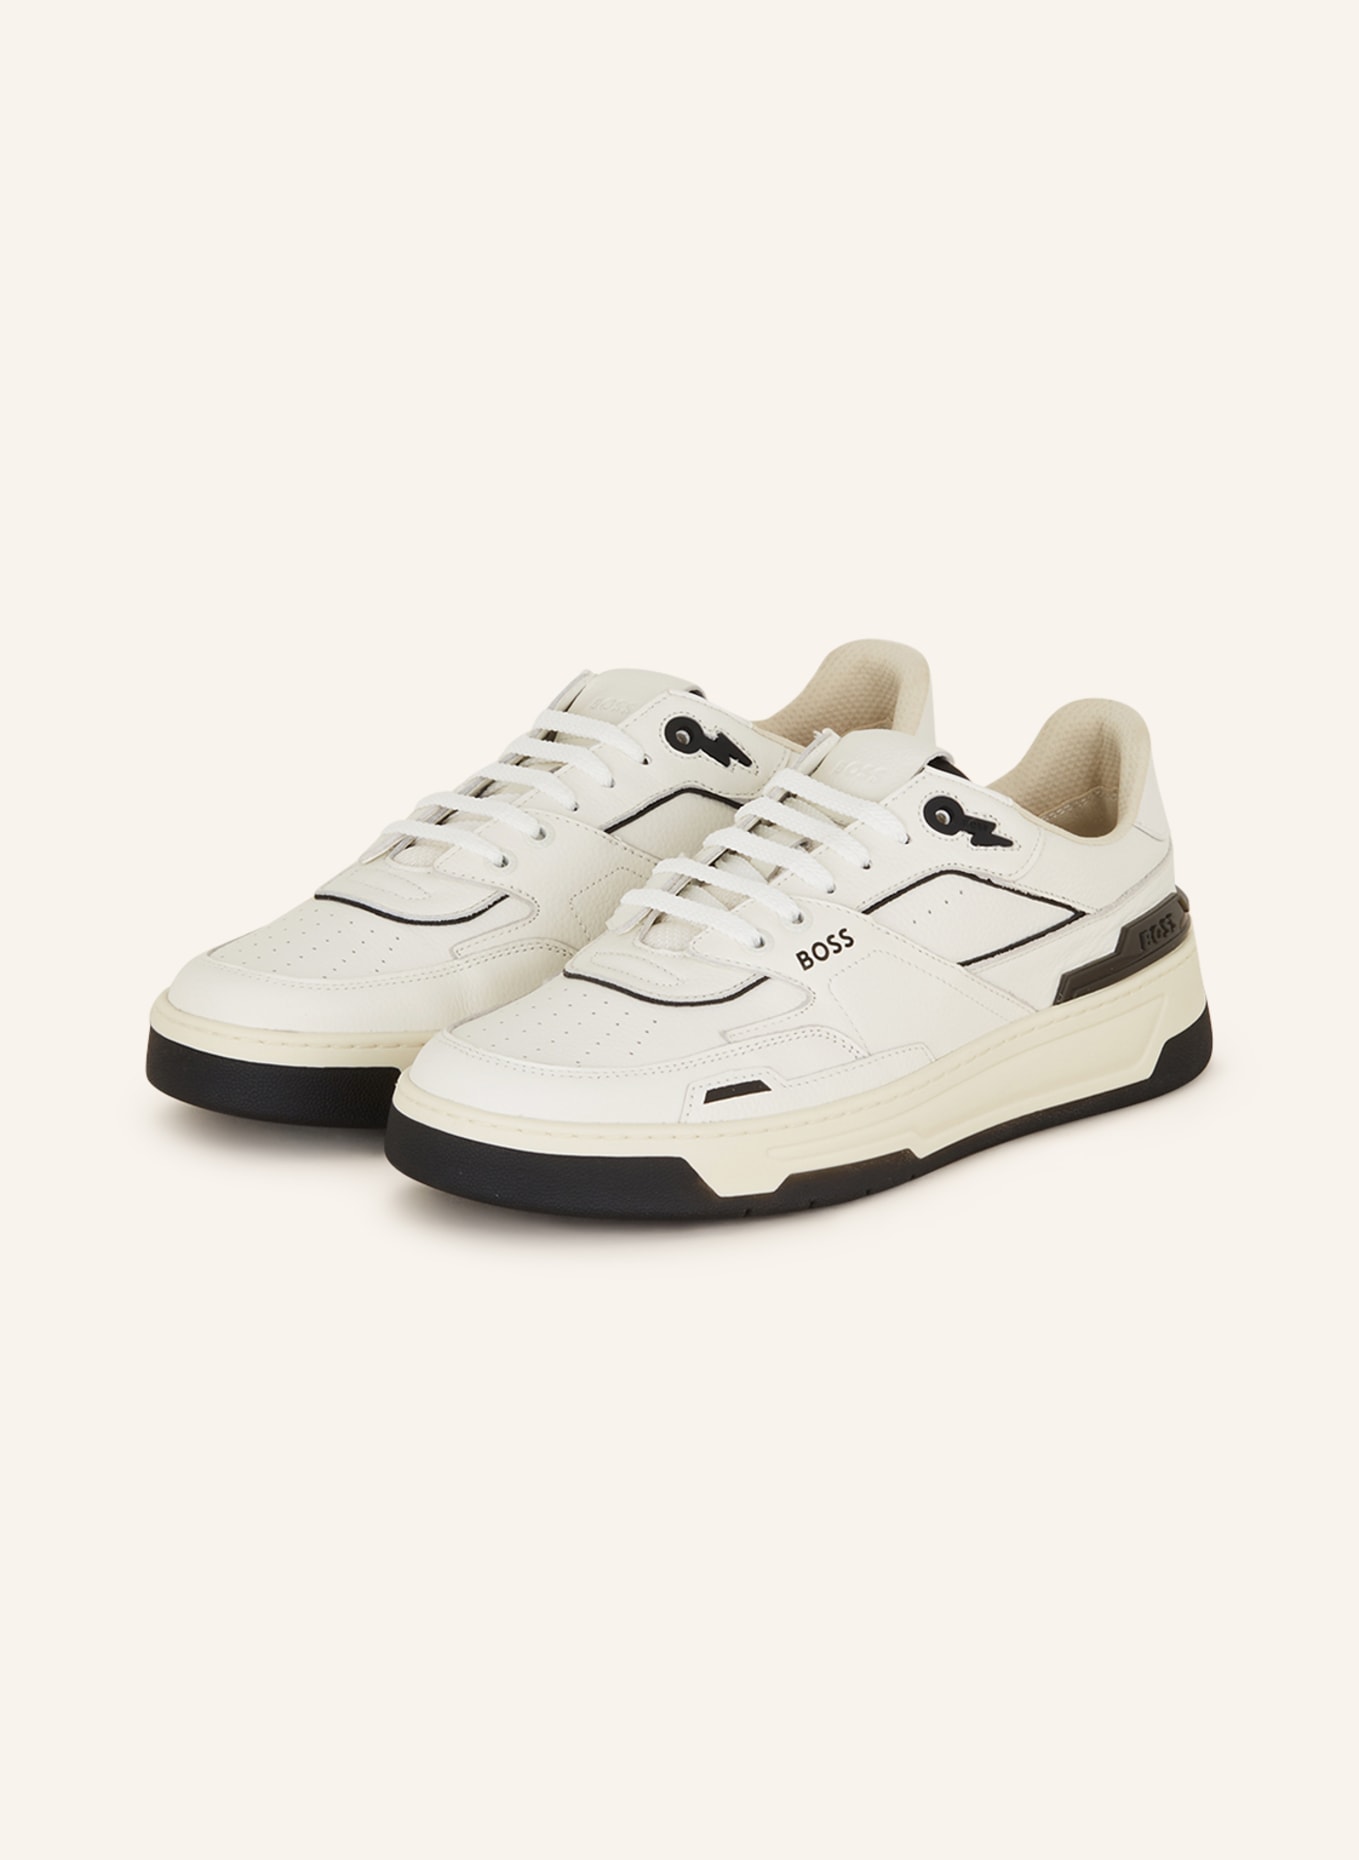 BOSS Sneakers BALTIMORE in white/